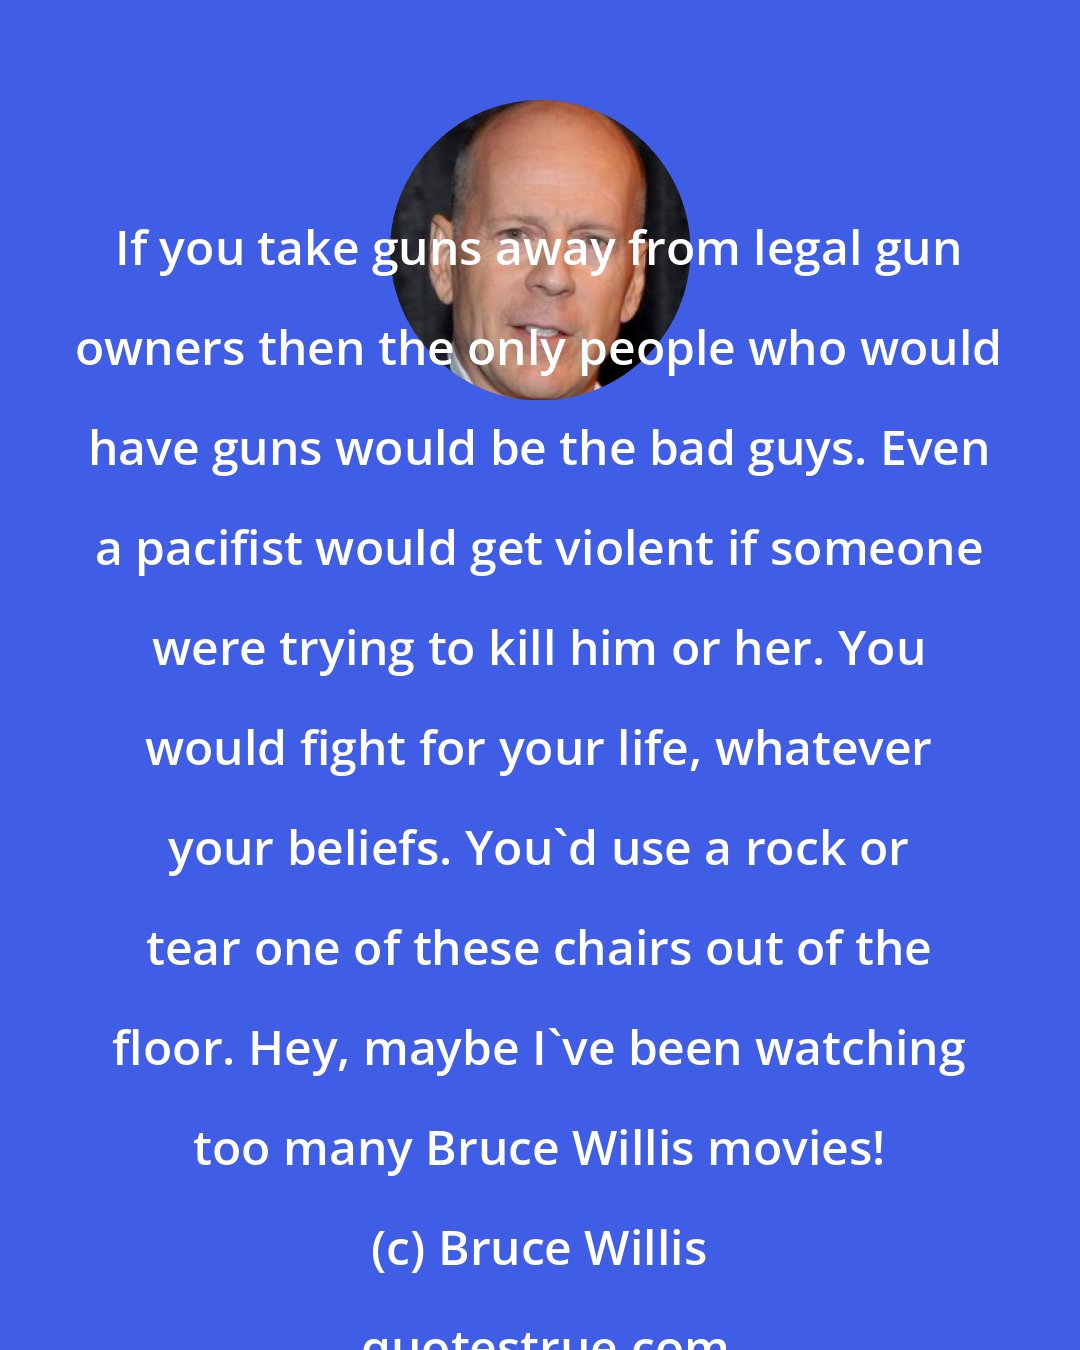 Bruce Willis: If you take guns away from legal gun owners then the only people who would have guns would be the bad guys. Even a pacifist would get violent if someone were trying to kill him or her. You would fight for your life, whatever your beliefs. You'd use a rock or tear one of these chairs out of the floor. Hey, maybe I've been watching too many Bruce Willis movies!